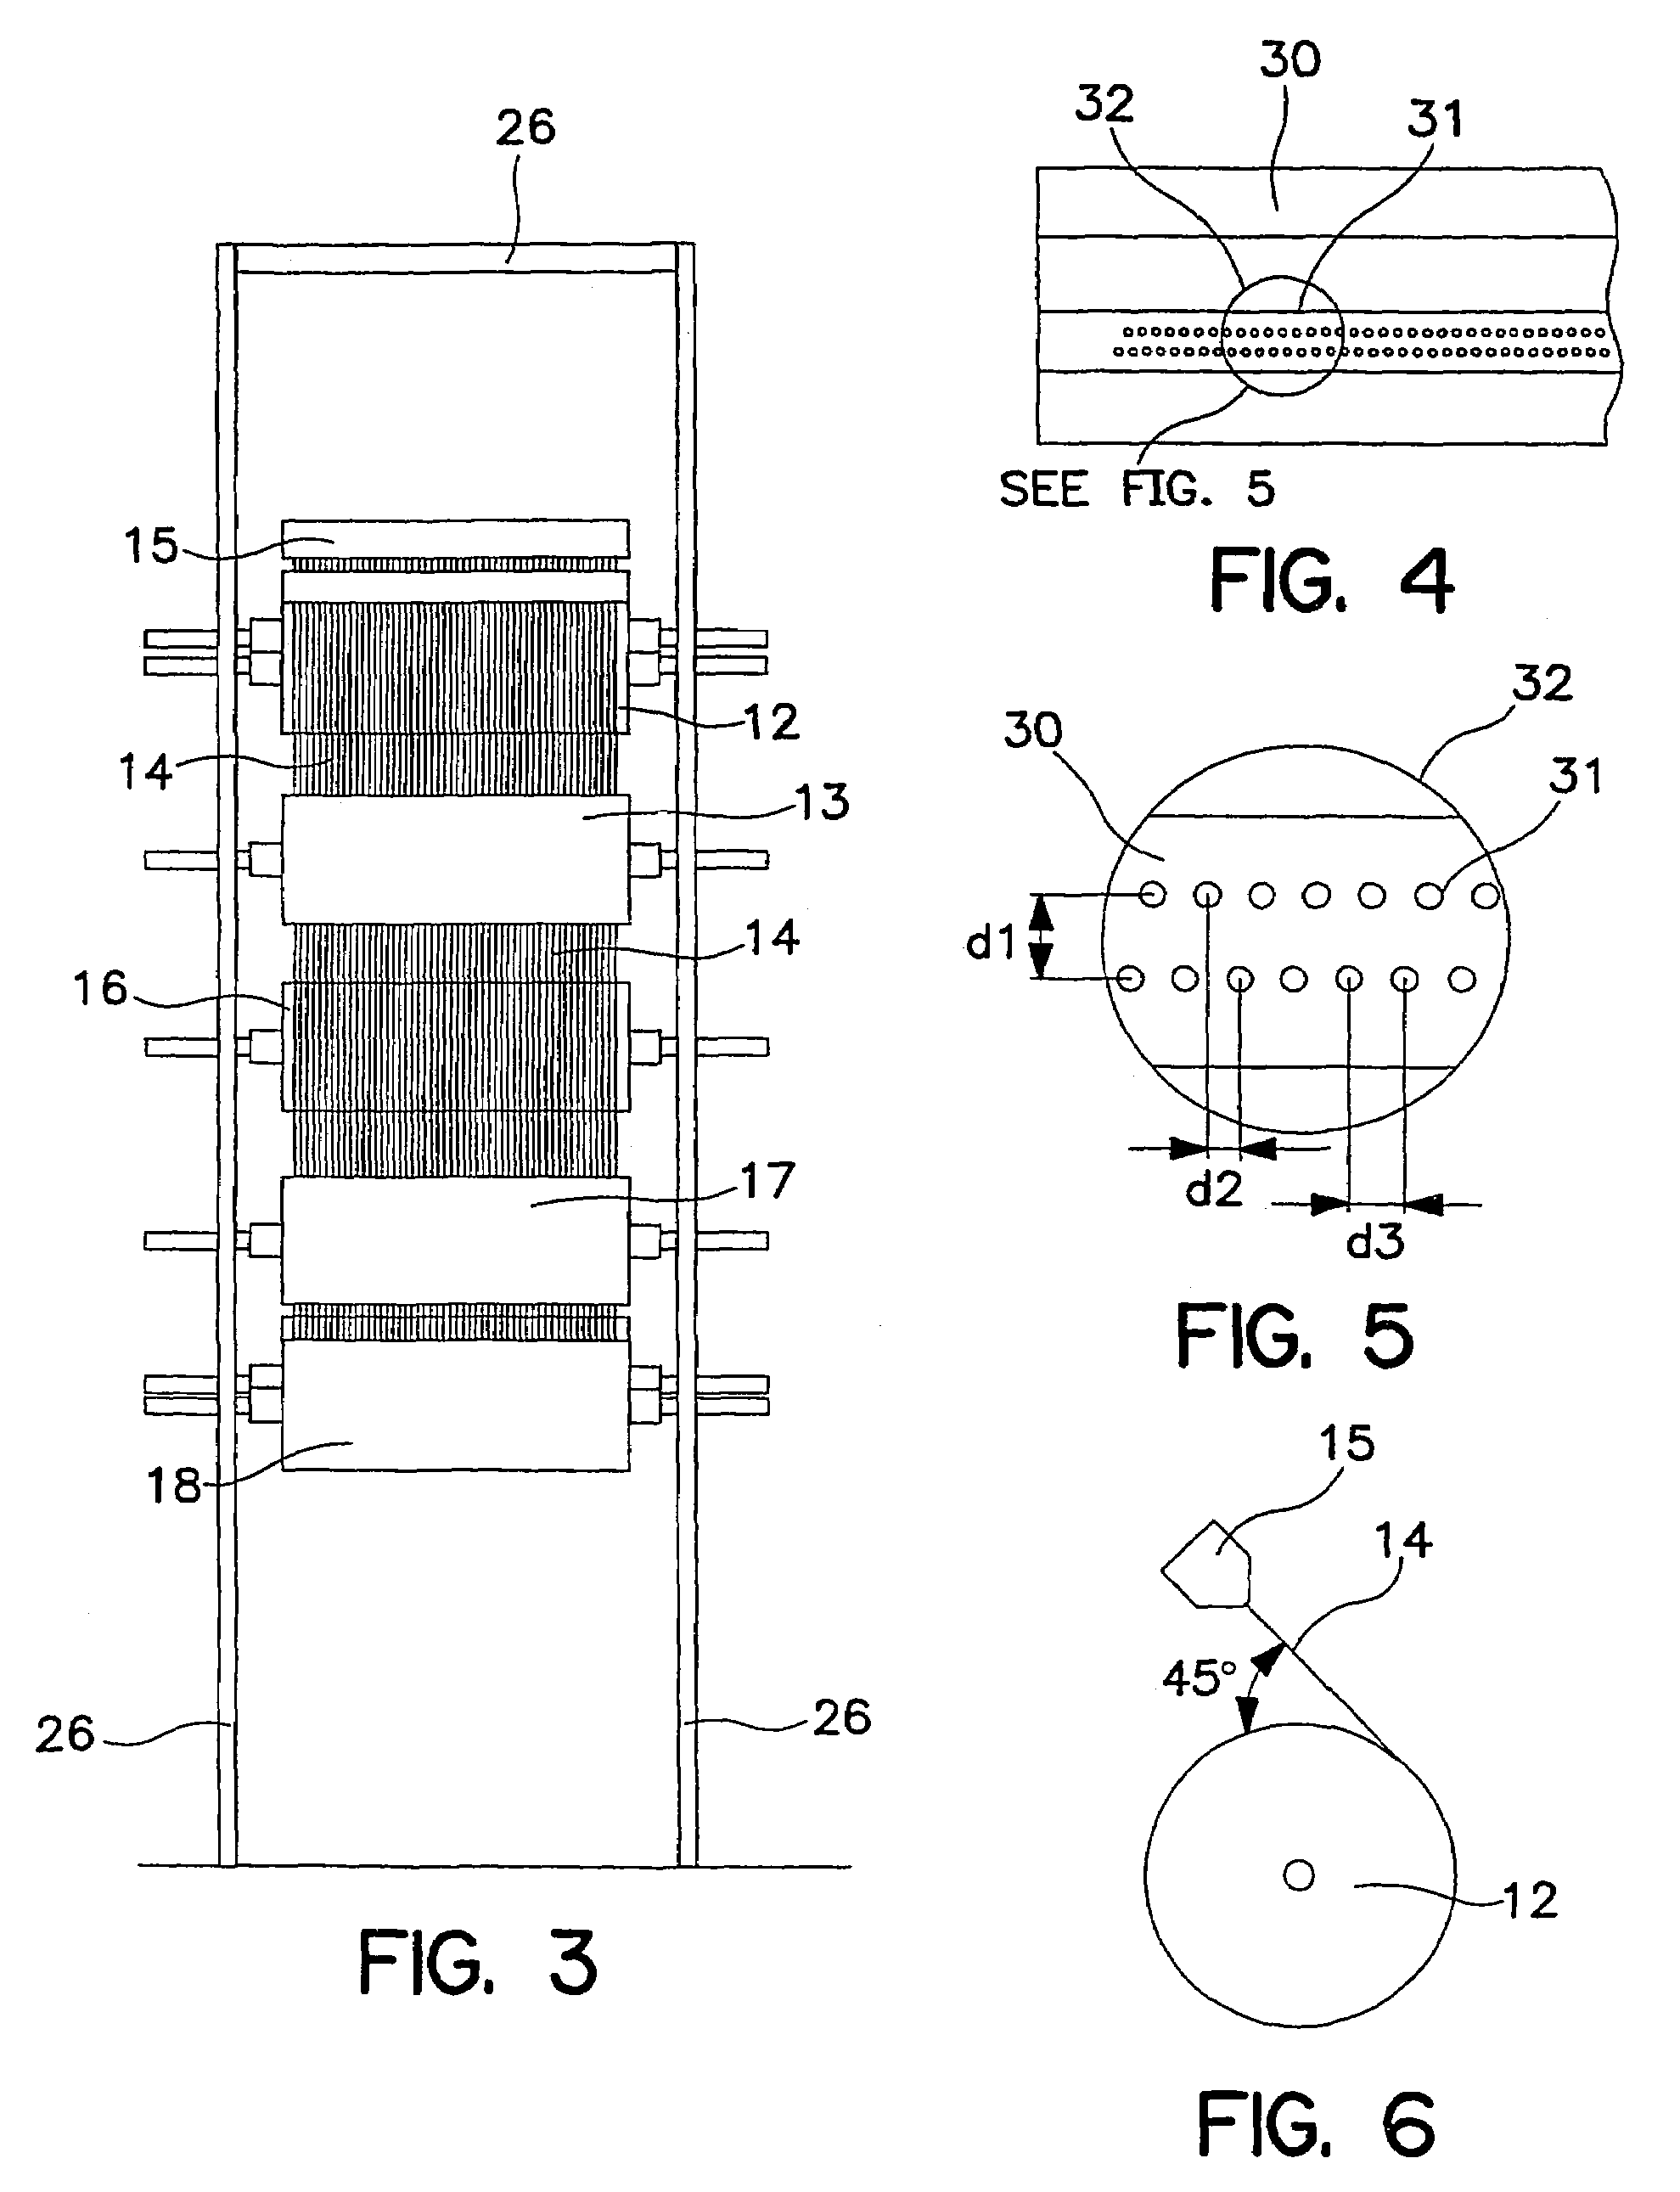 Method of thermally processing elastomeric compositions and elastomeric compositions with improved processability